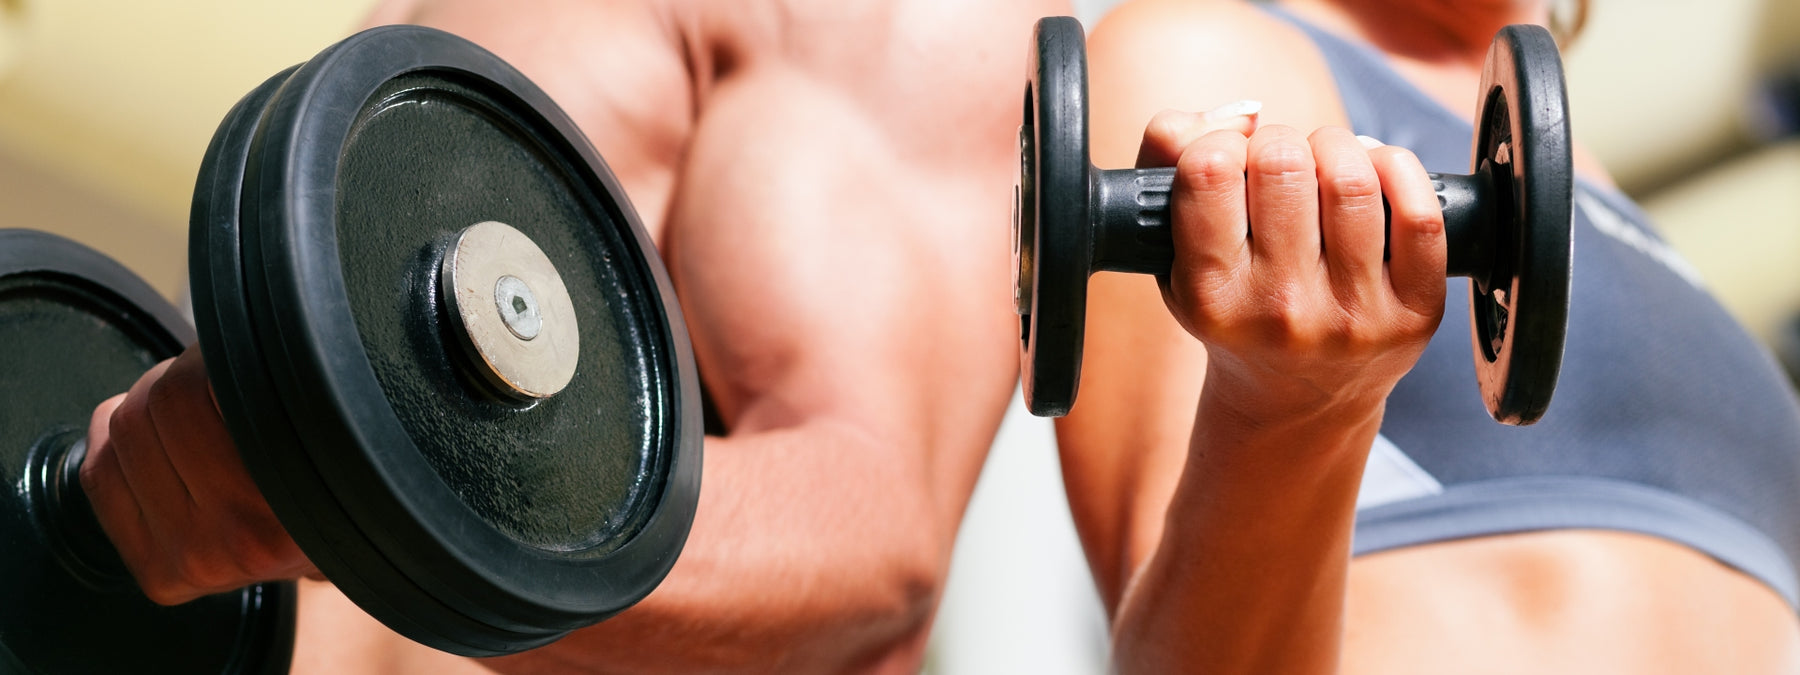 Studies Suggest Lifting Weights Helps You Live Longer